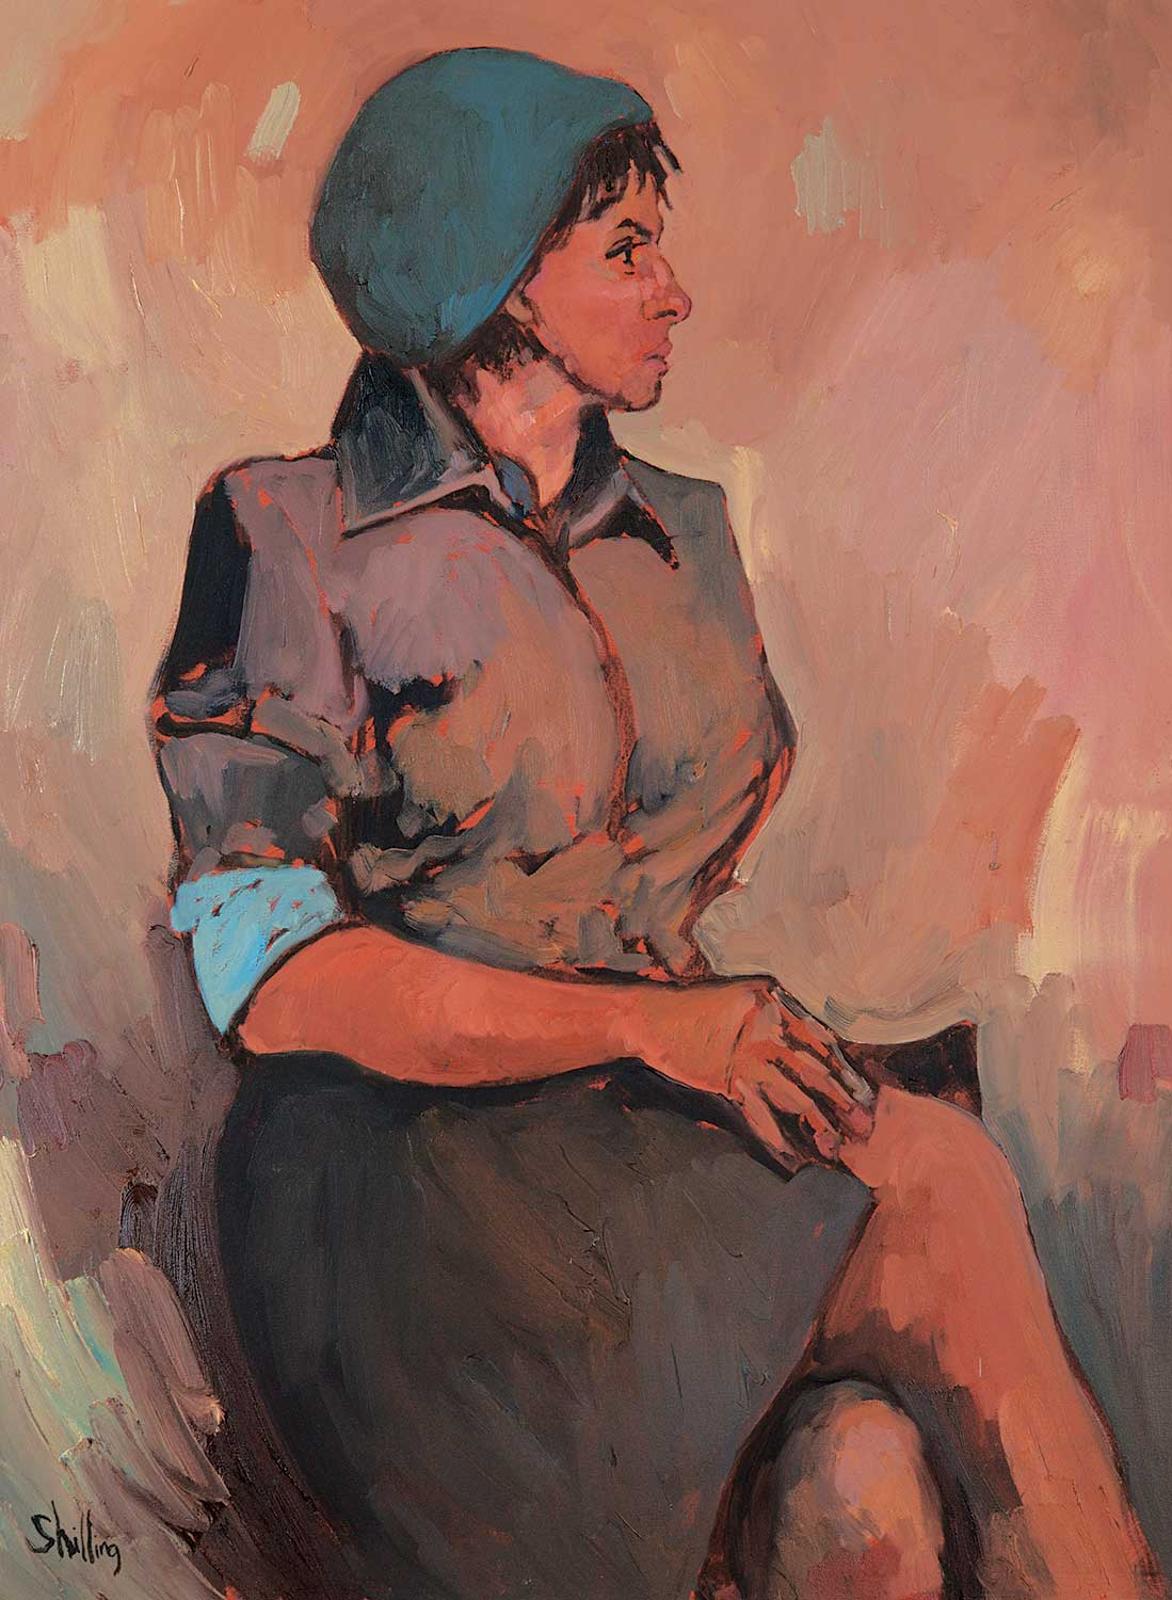 Bewabon Shilling (1977) - Untitled - The Girl in the Blue Hat